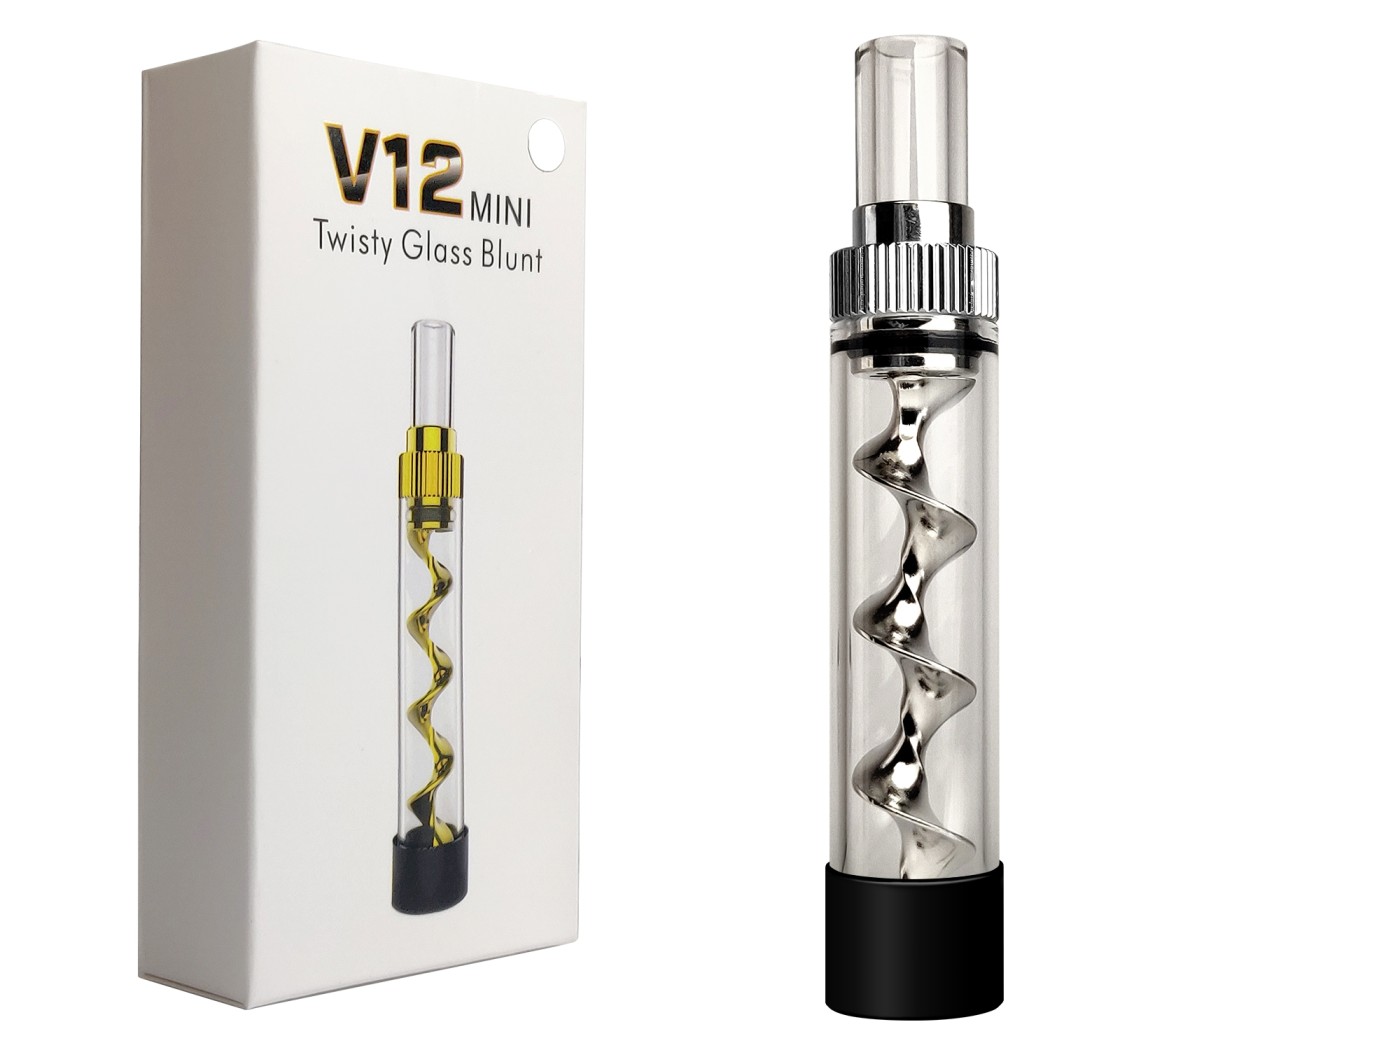 Twisty Glass Blunt Mini: Compact, Convenient, and Available for Purchase Now!